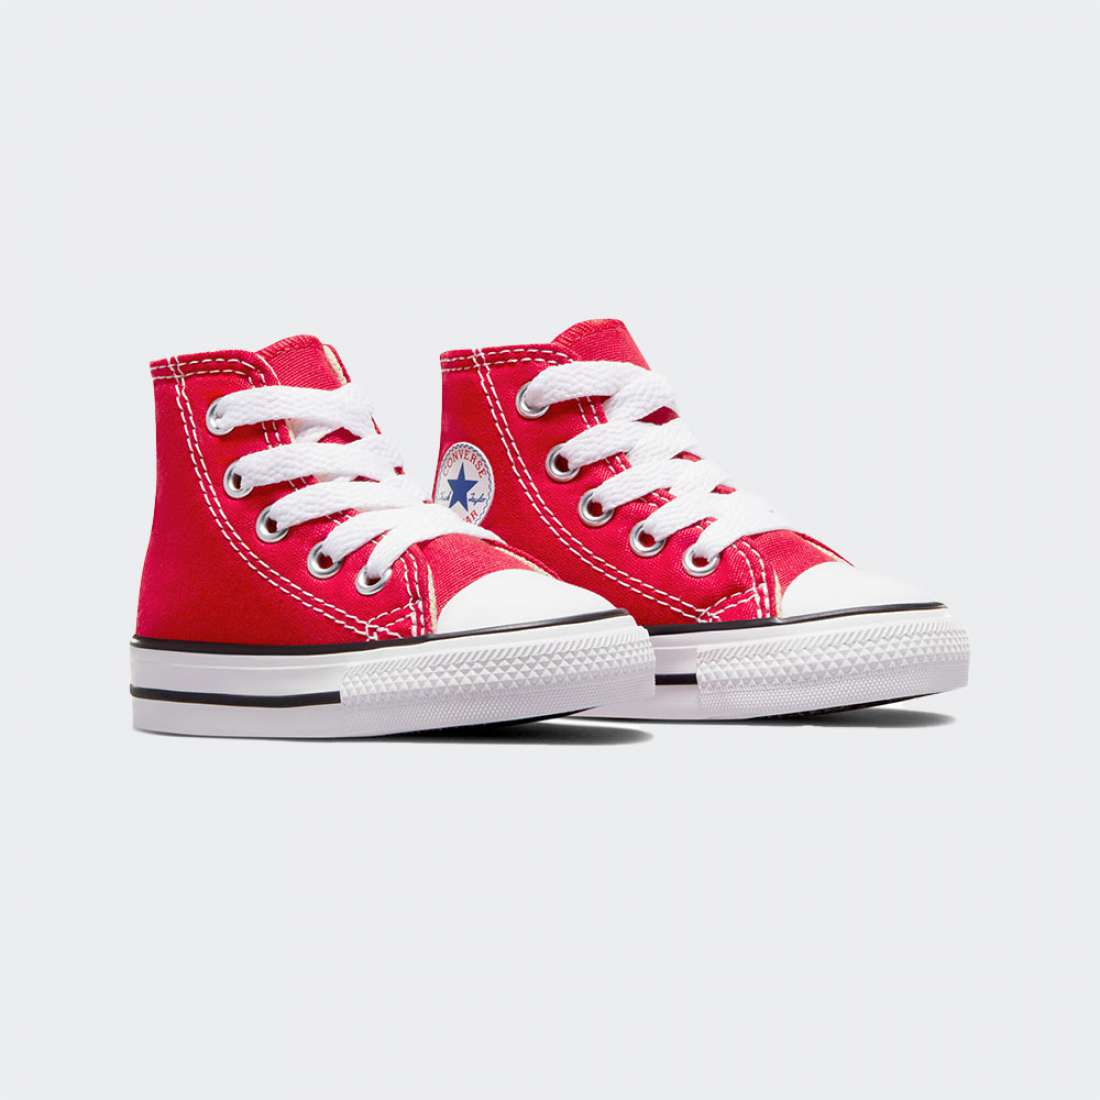 CONVERSE CHUCK TAYLOR ALL STAR HIGH TOP I VARSITY RED